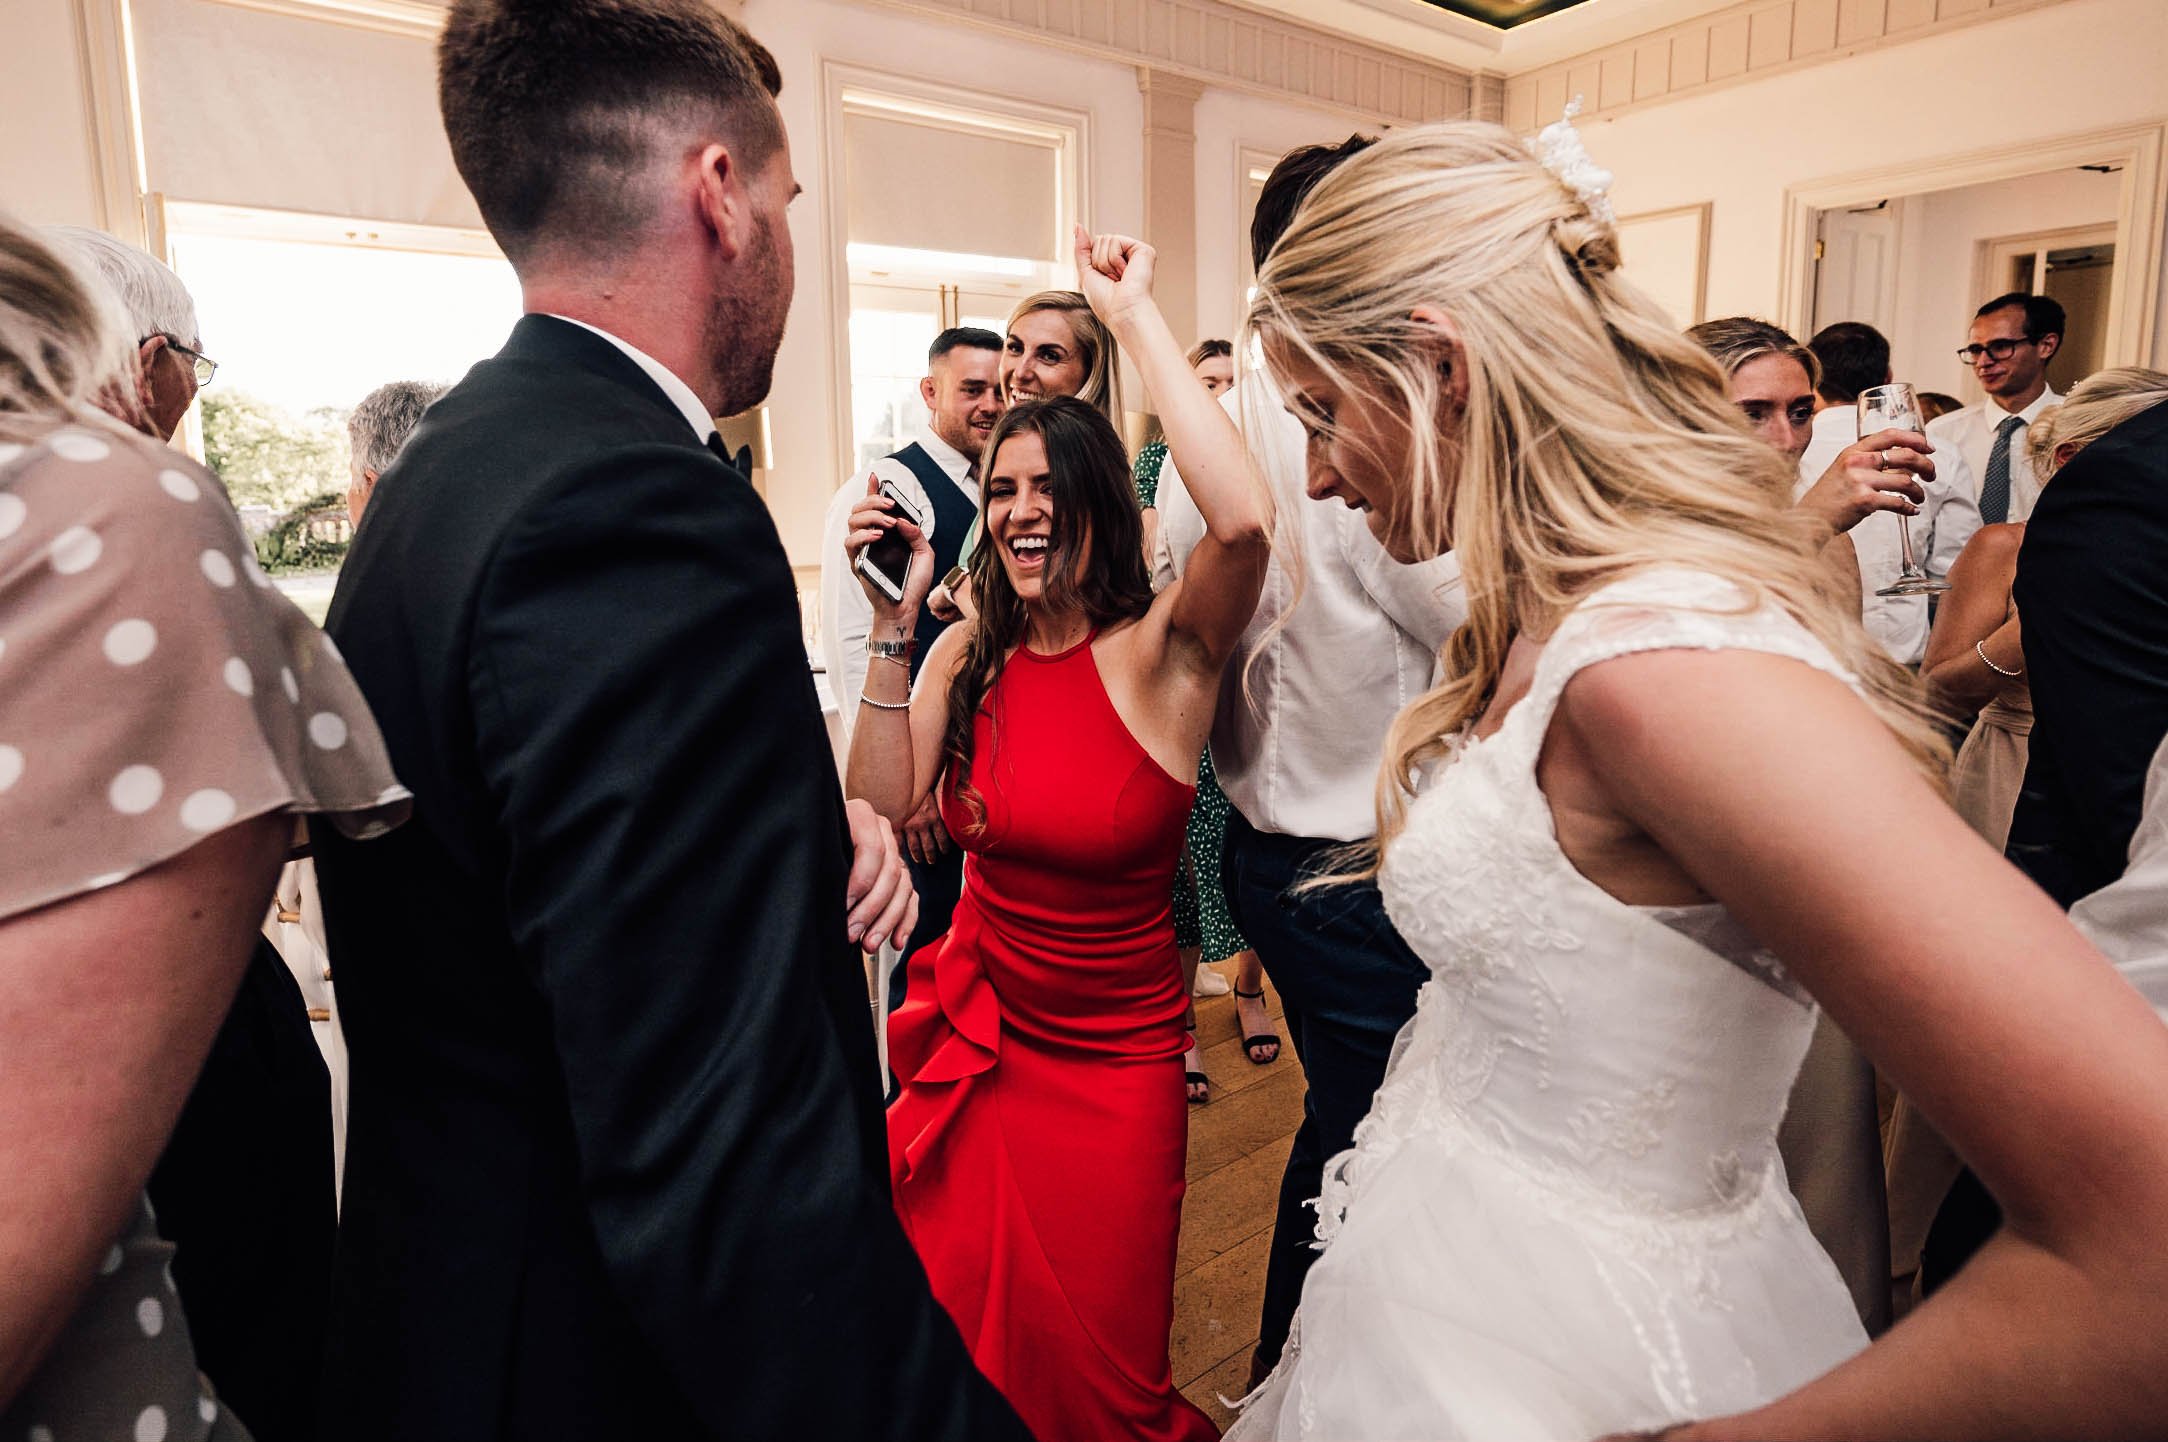 guests on the dance floor at Hodsock Priory wedding